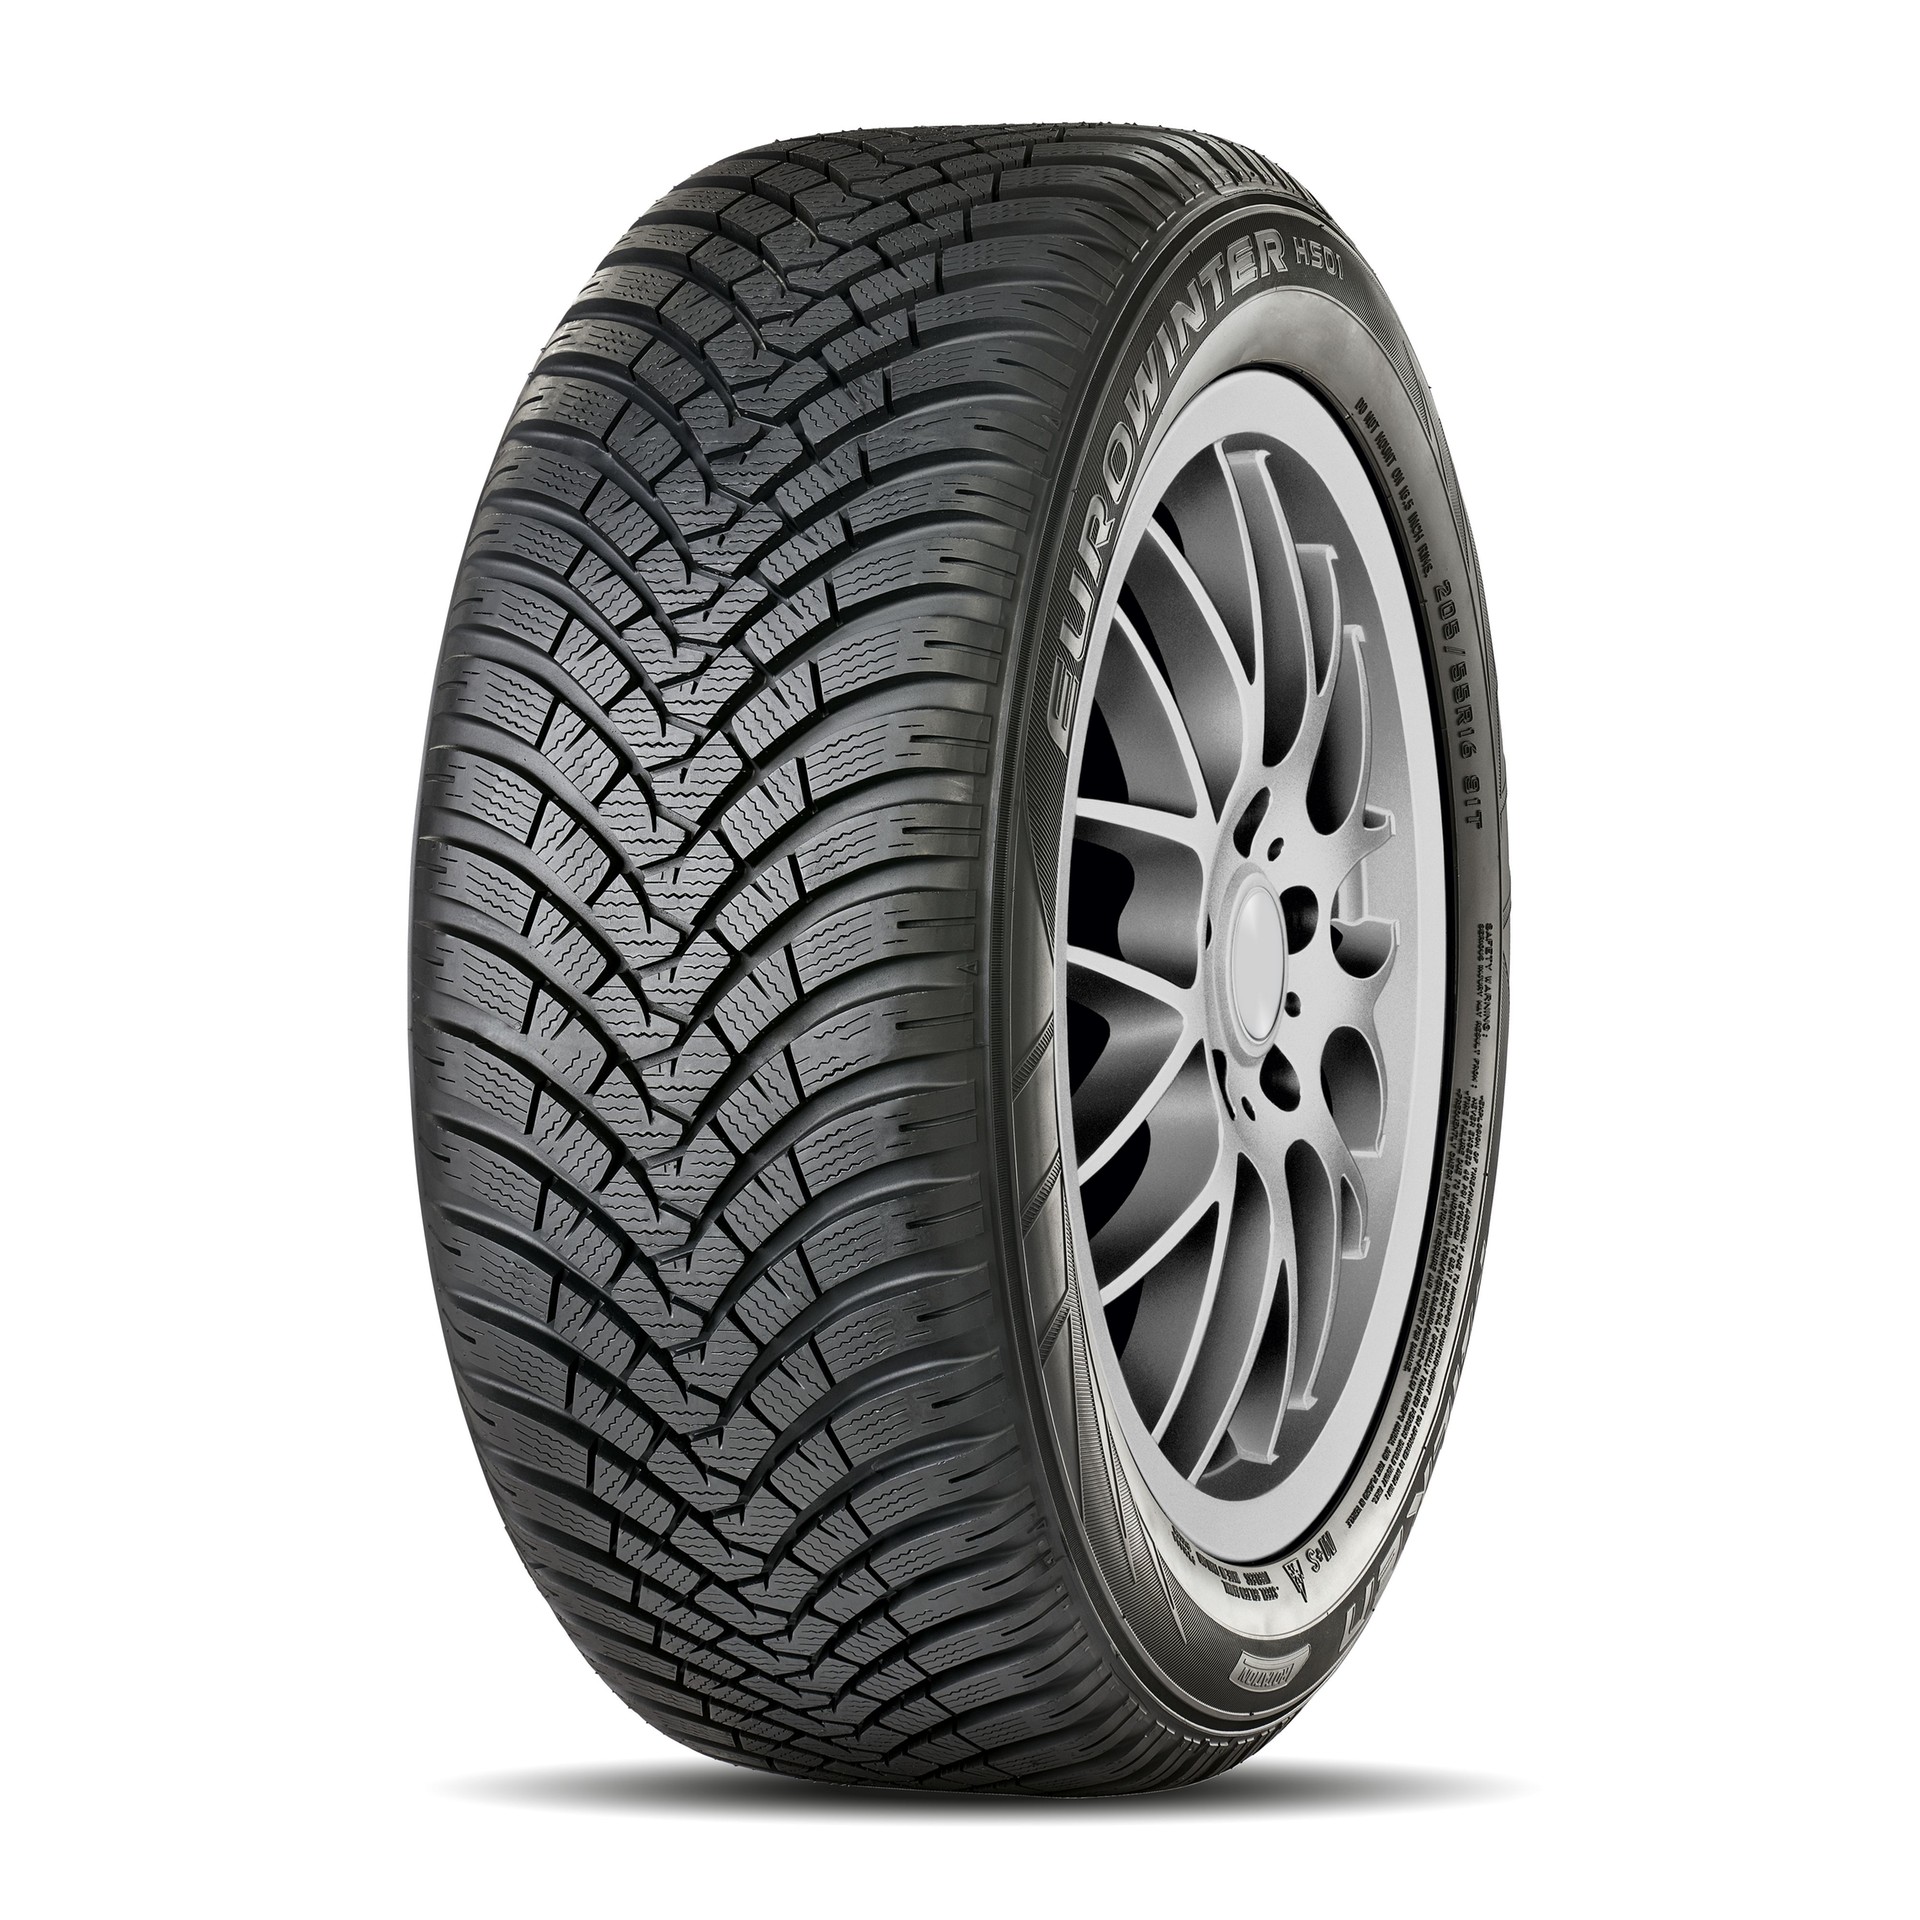 Falken Eurowinter HS01 - Tire and Reviews Tests